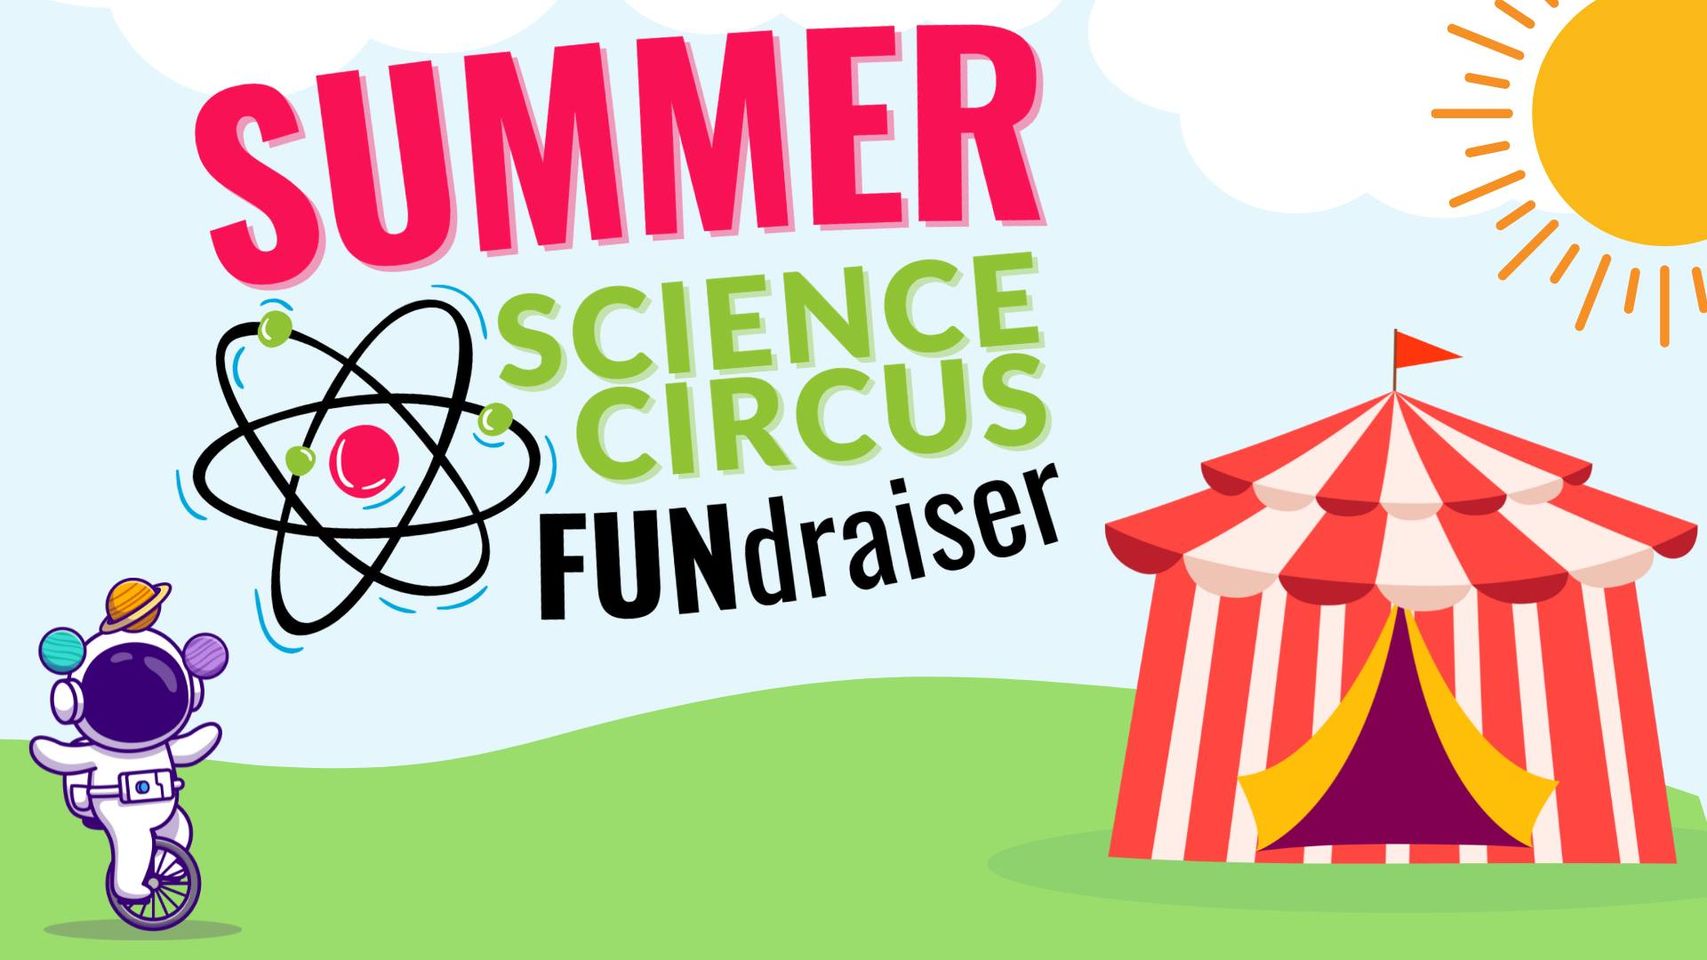 Summer Science Circus Fundraiser TWOSE